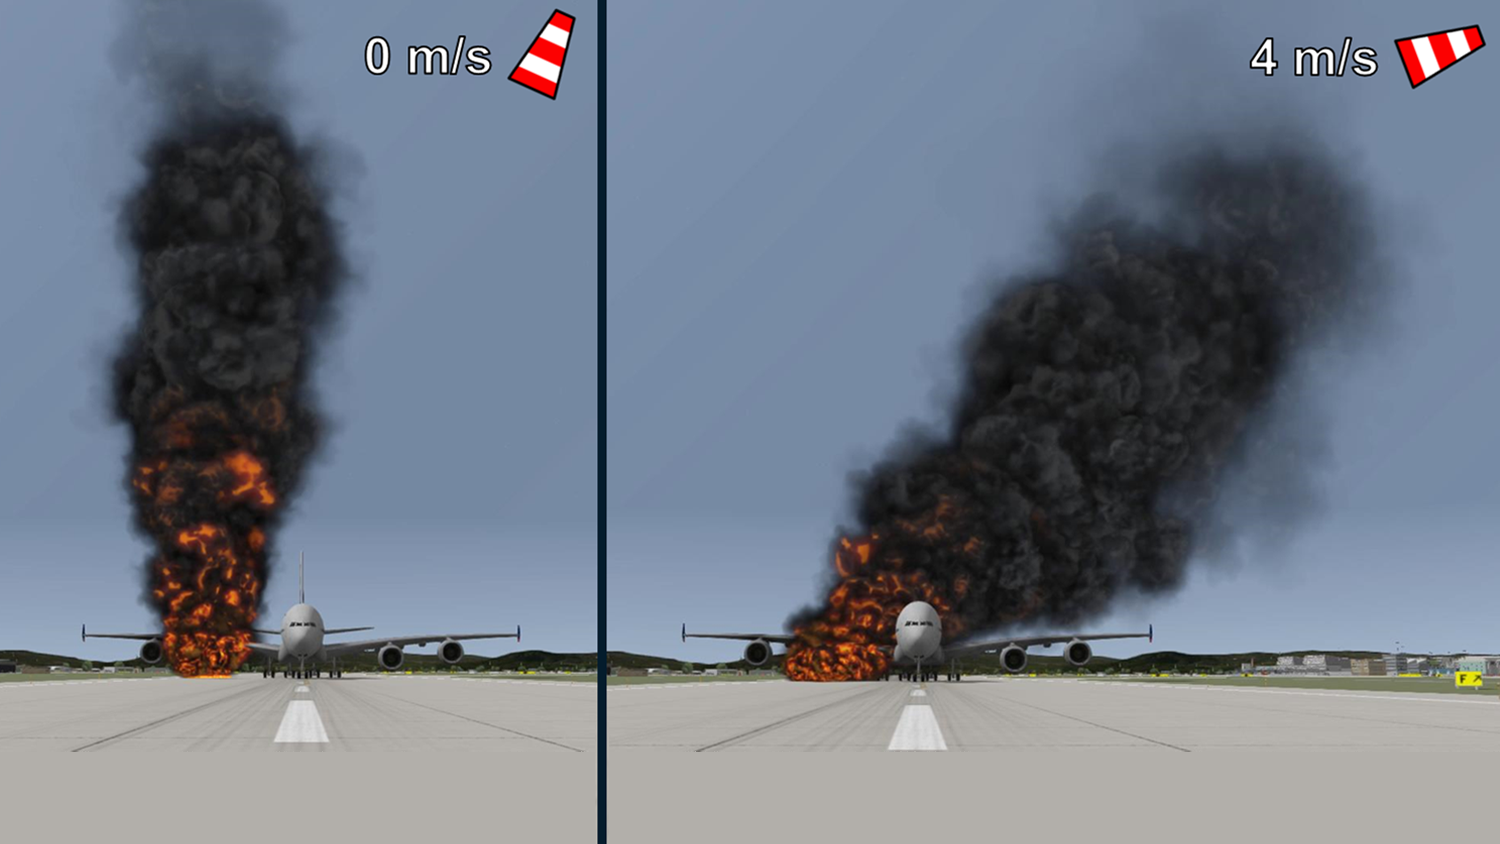 Wind speed and direction changes affecting fire and smoke in the virtual environment calculated by ADMS software.